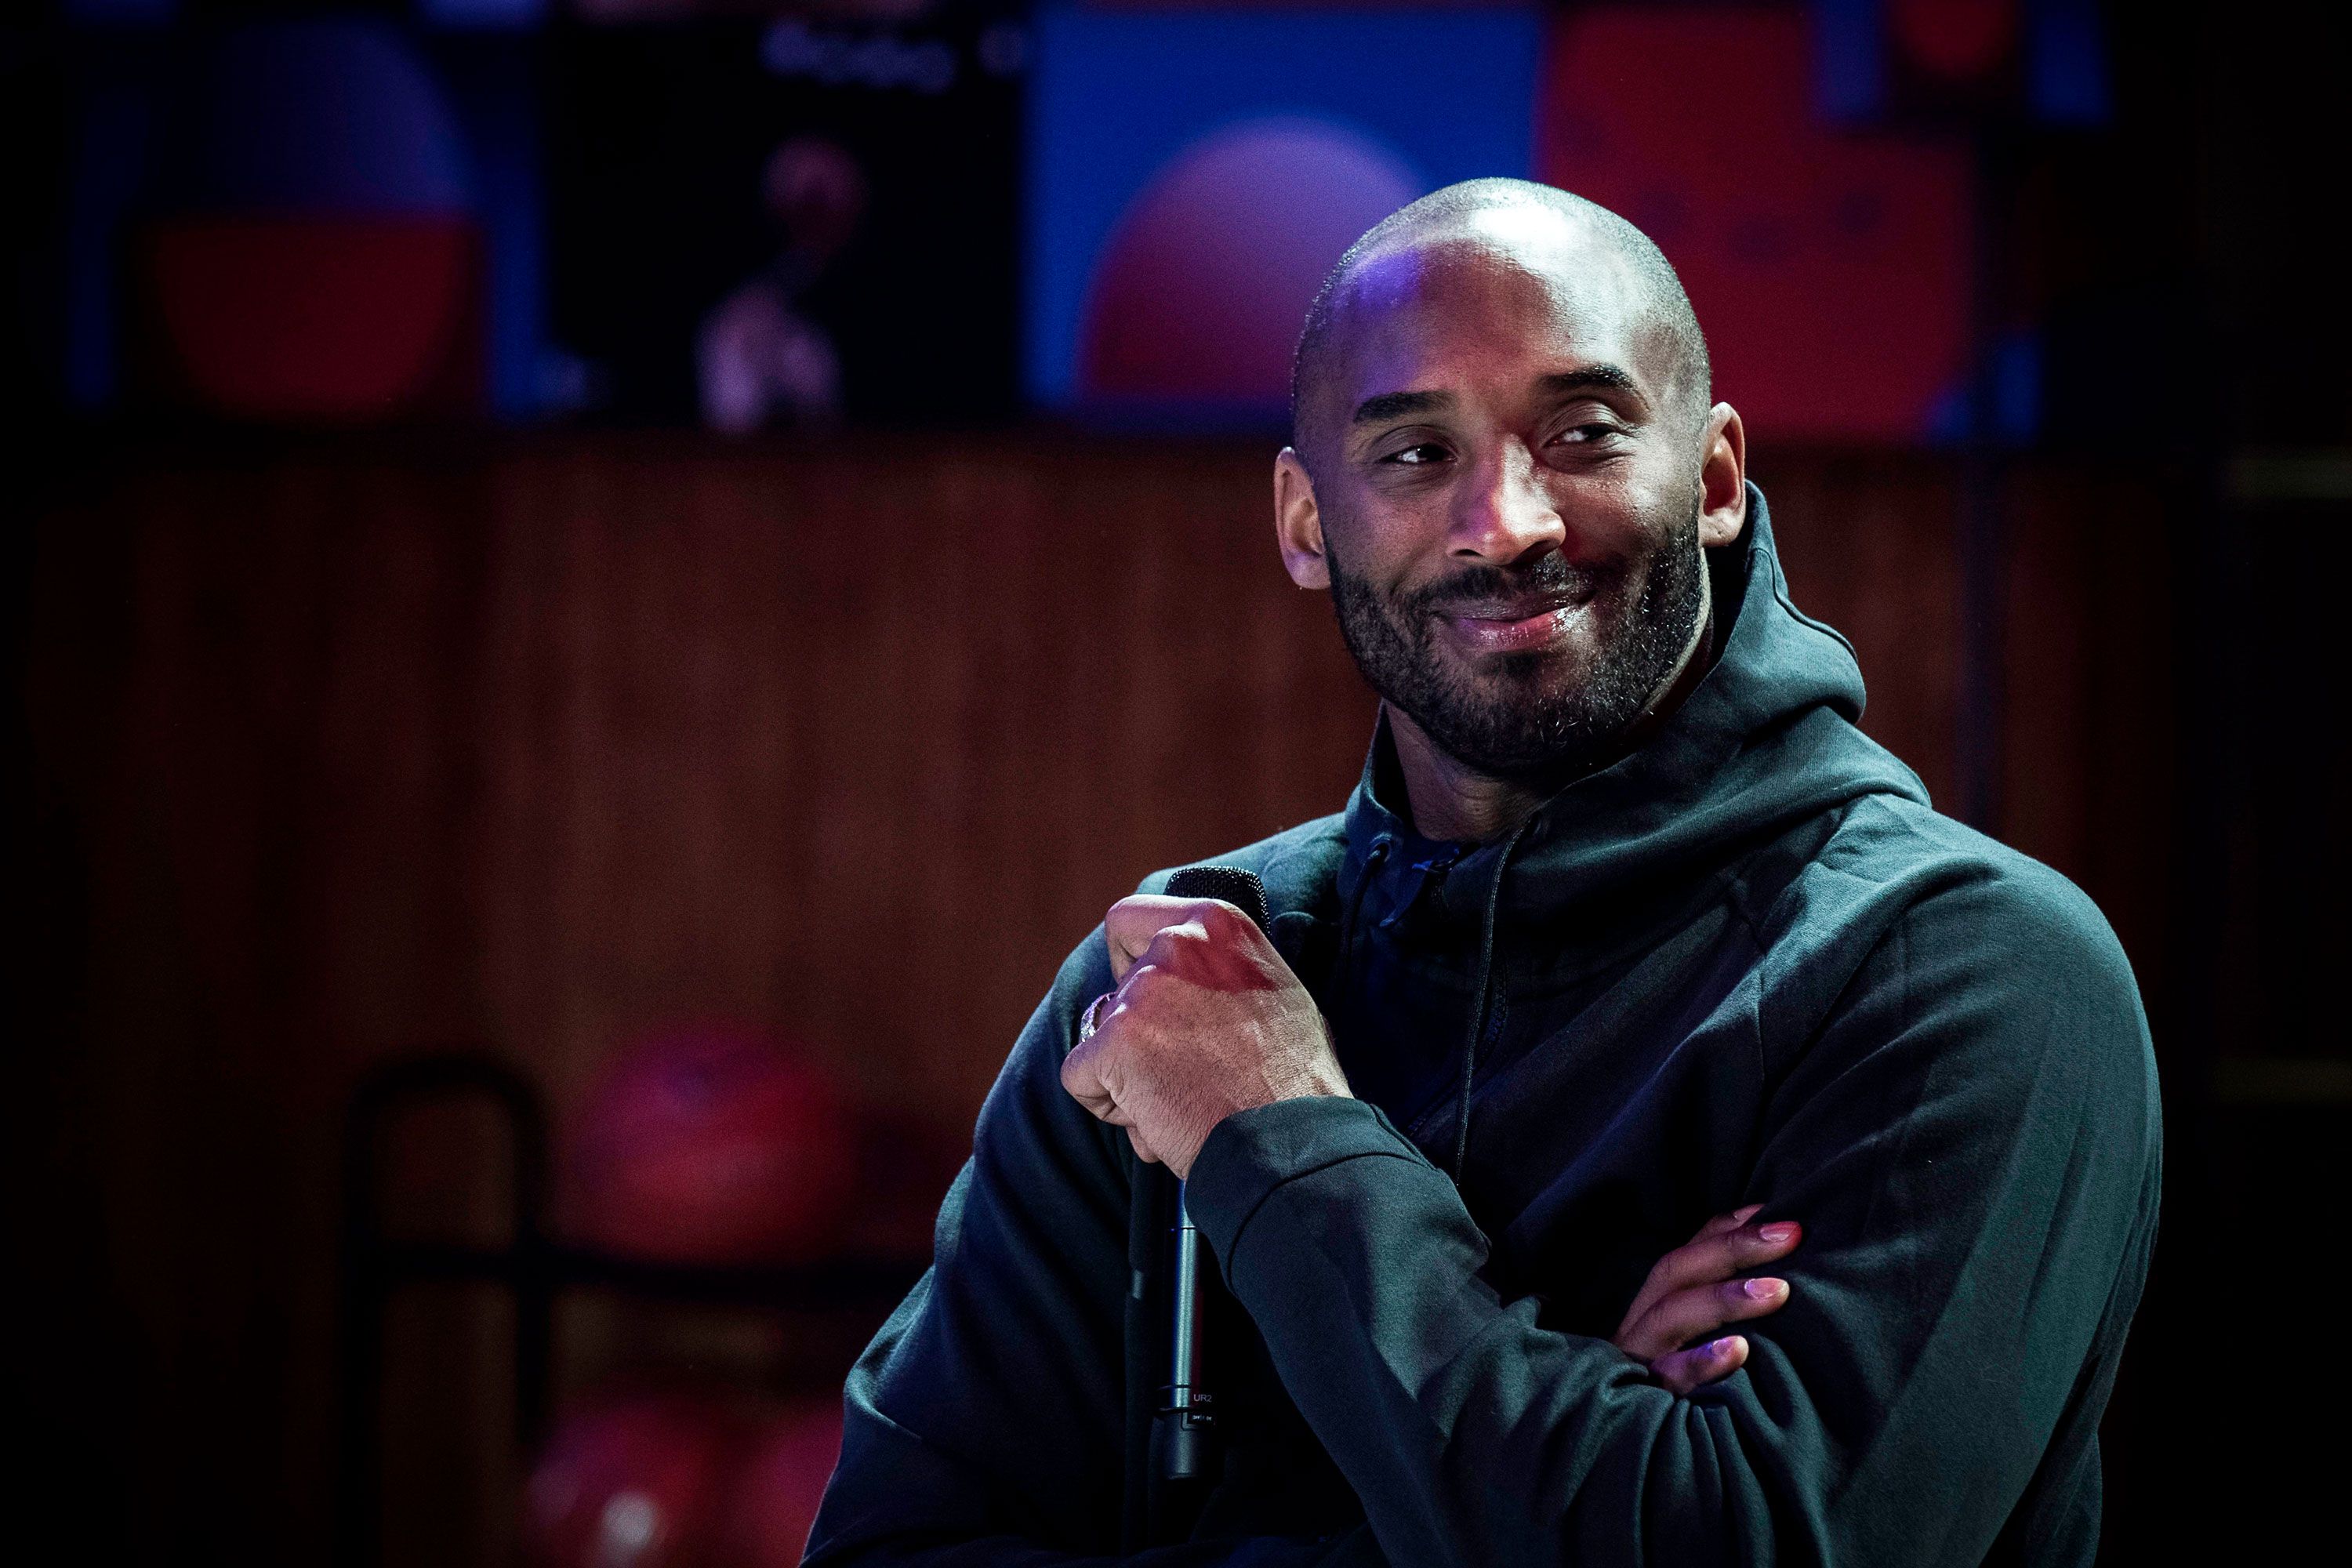 Kobe Bryant Visits NBA Store in NYC to Celebrate His New Book 'The